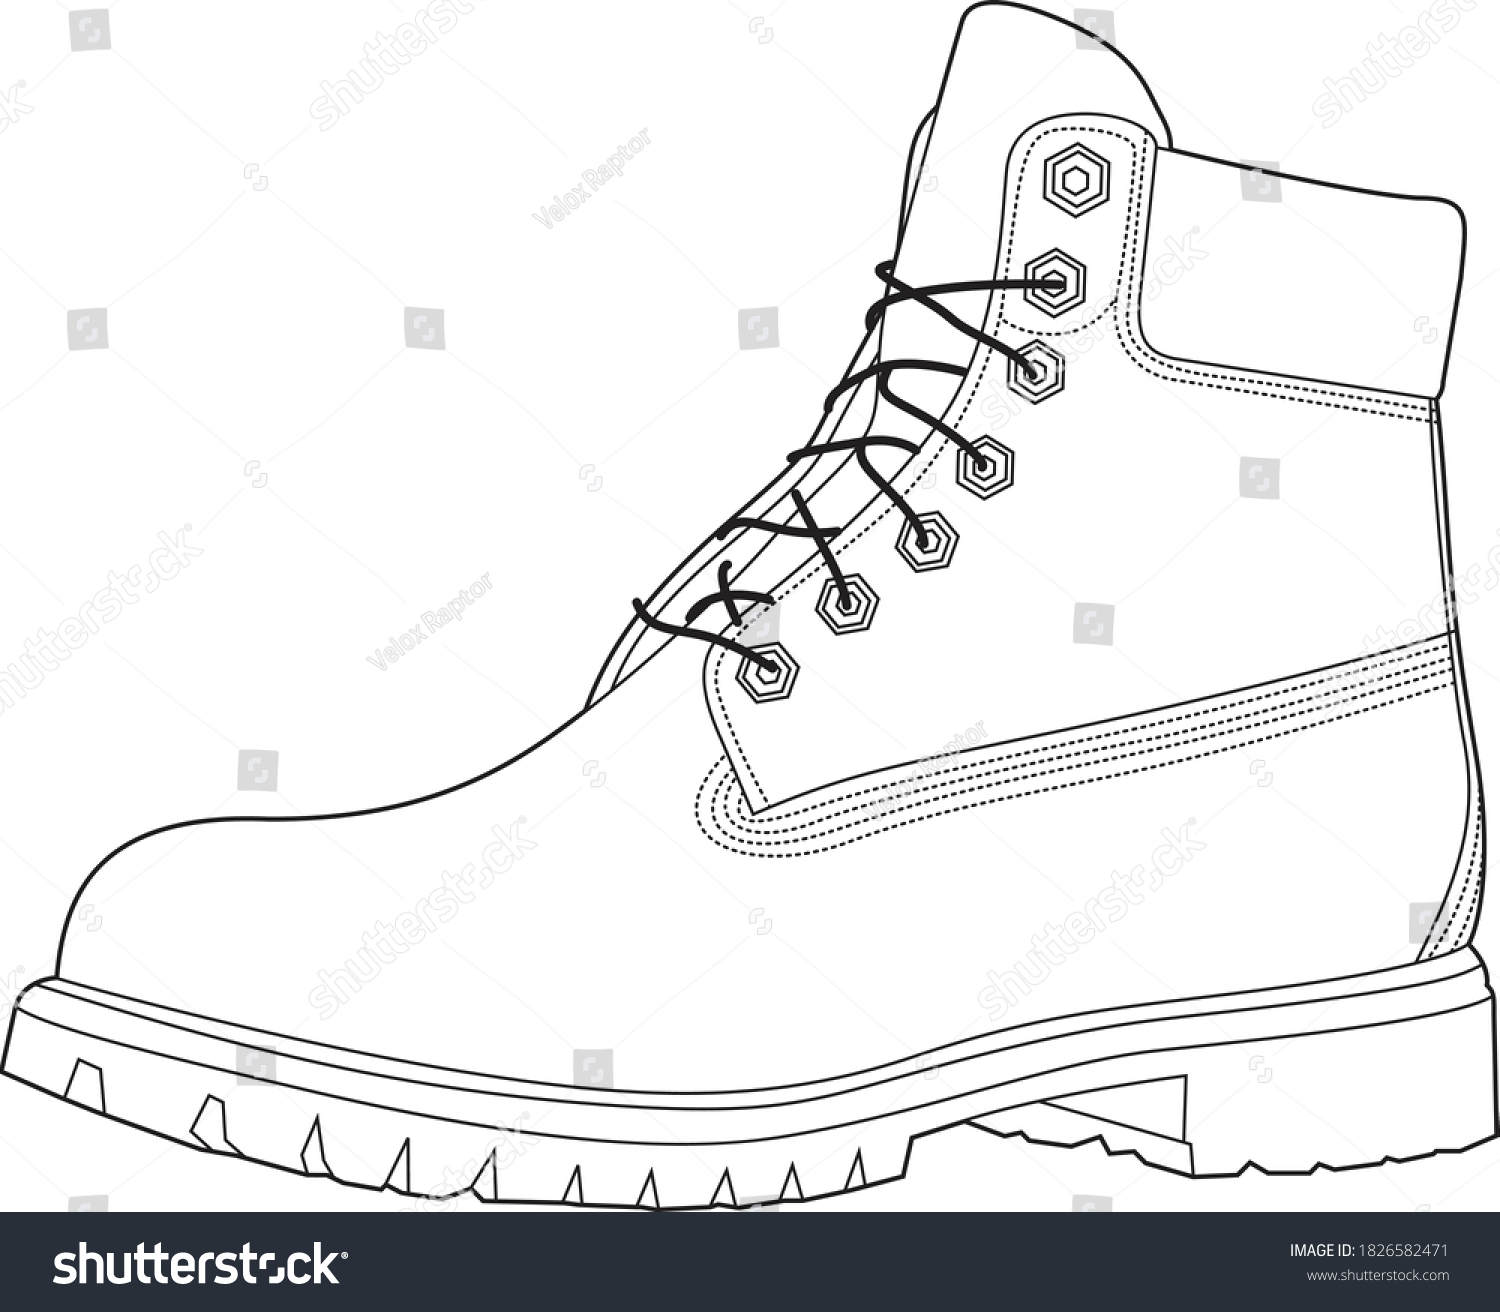 77 Timberland boot Stock Illustrations, Images & Vectors | Shutterstock